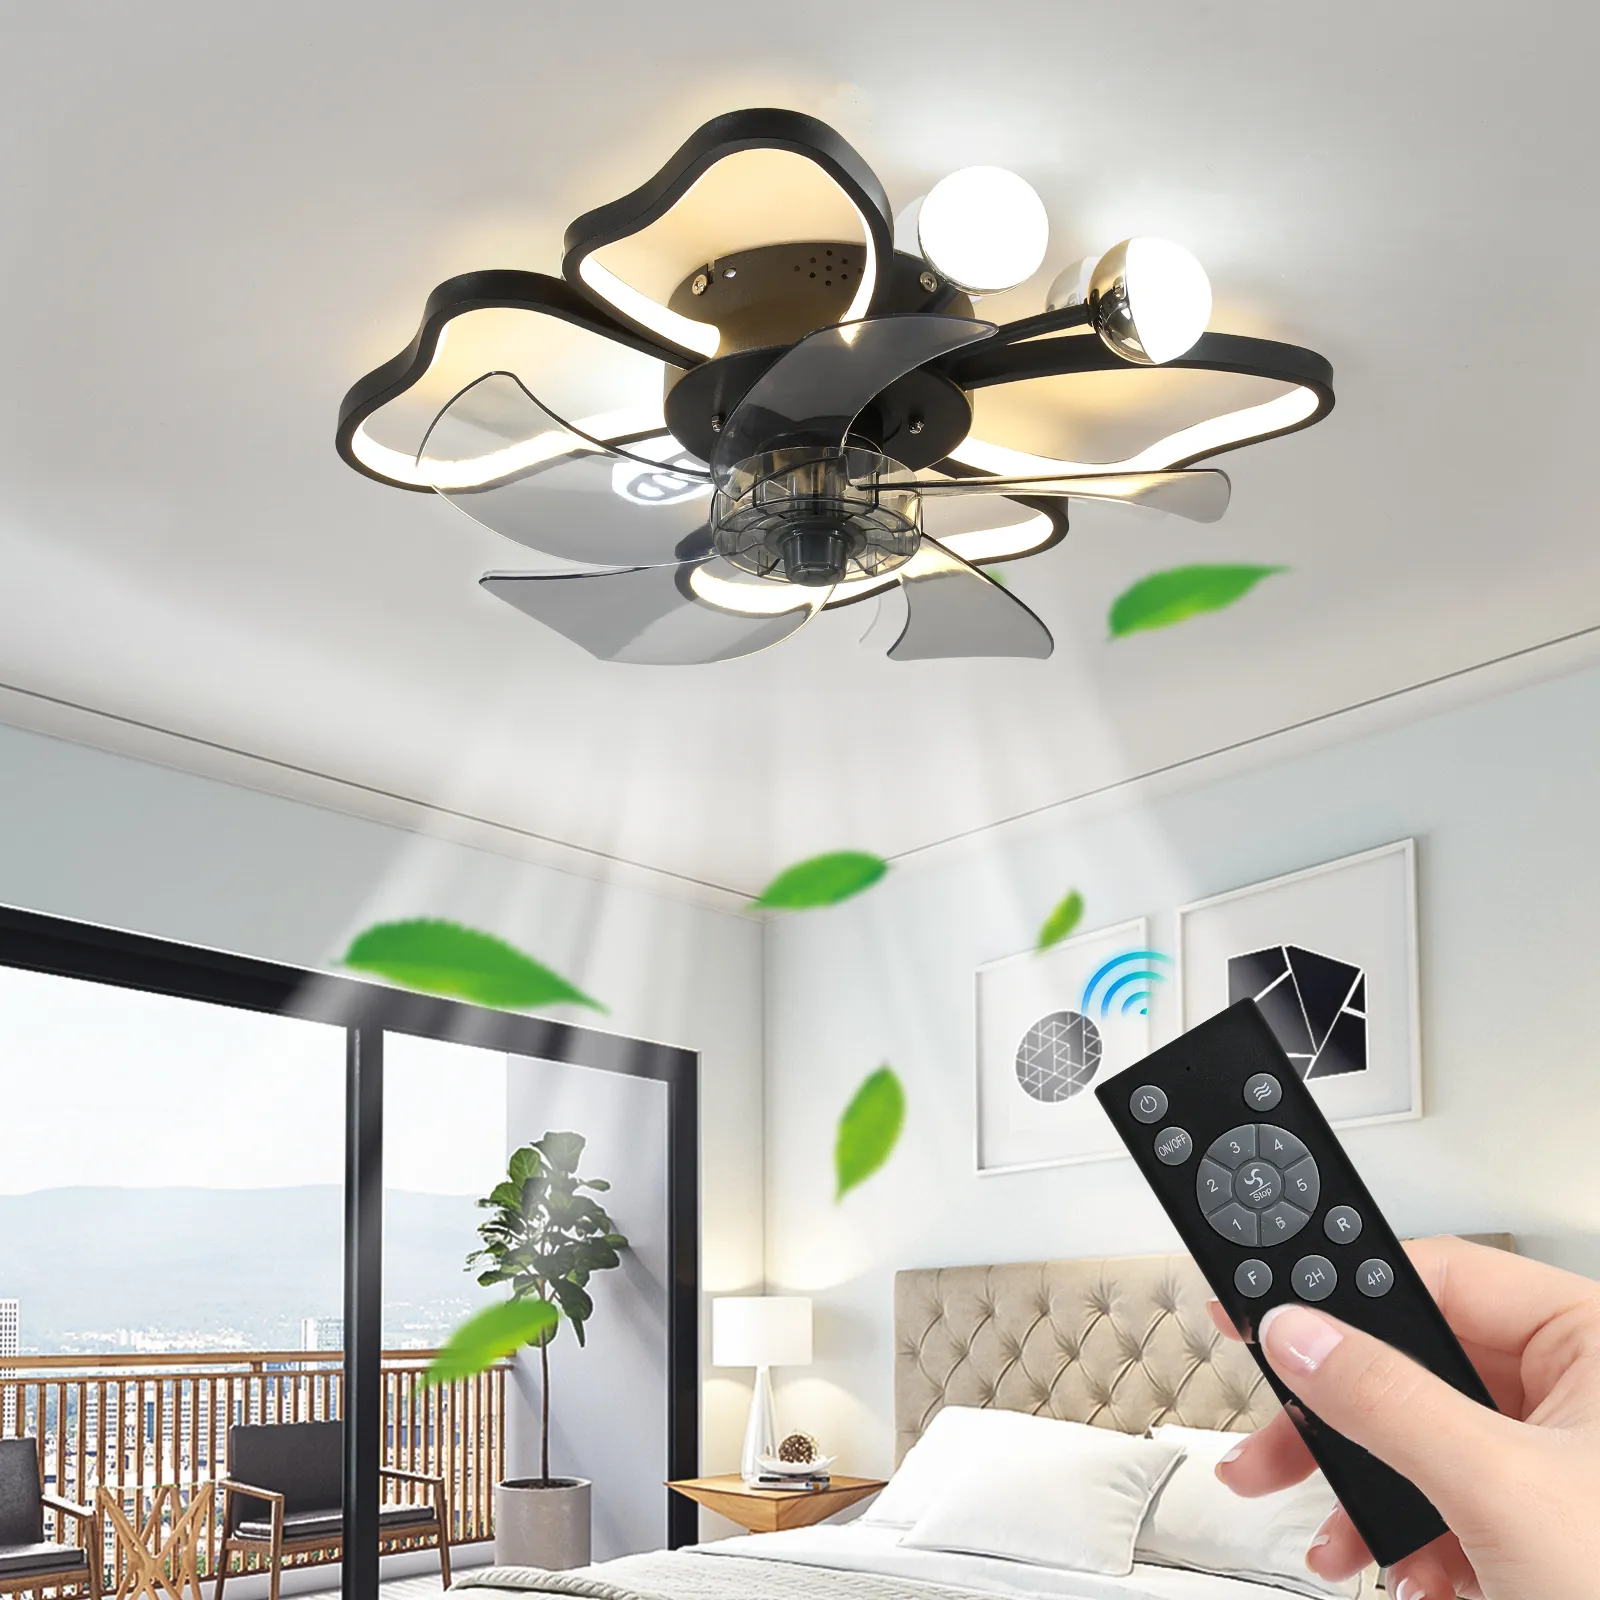 Modern hanging fan 19.7 Inch Light Ceiling Fan with Lights Remote Control with Modern Butterfly Design Styling, Black